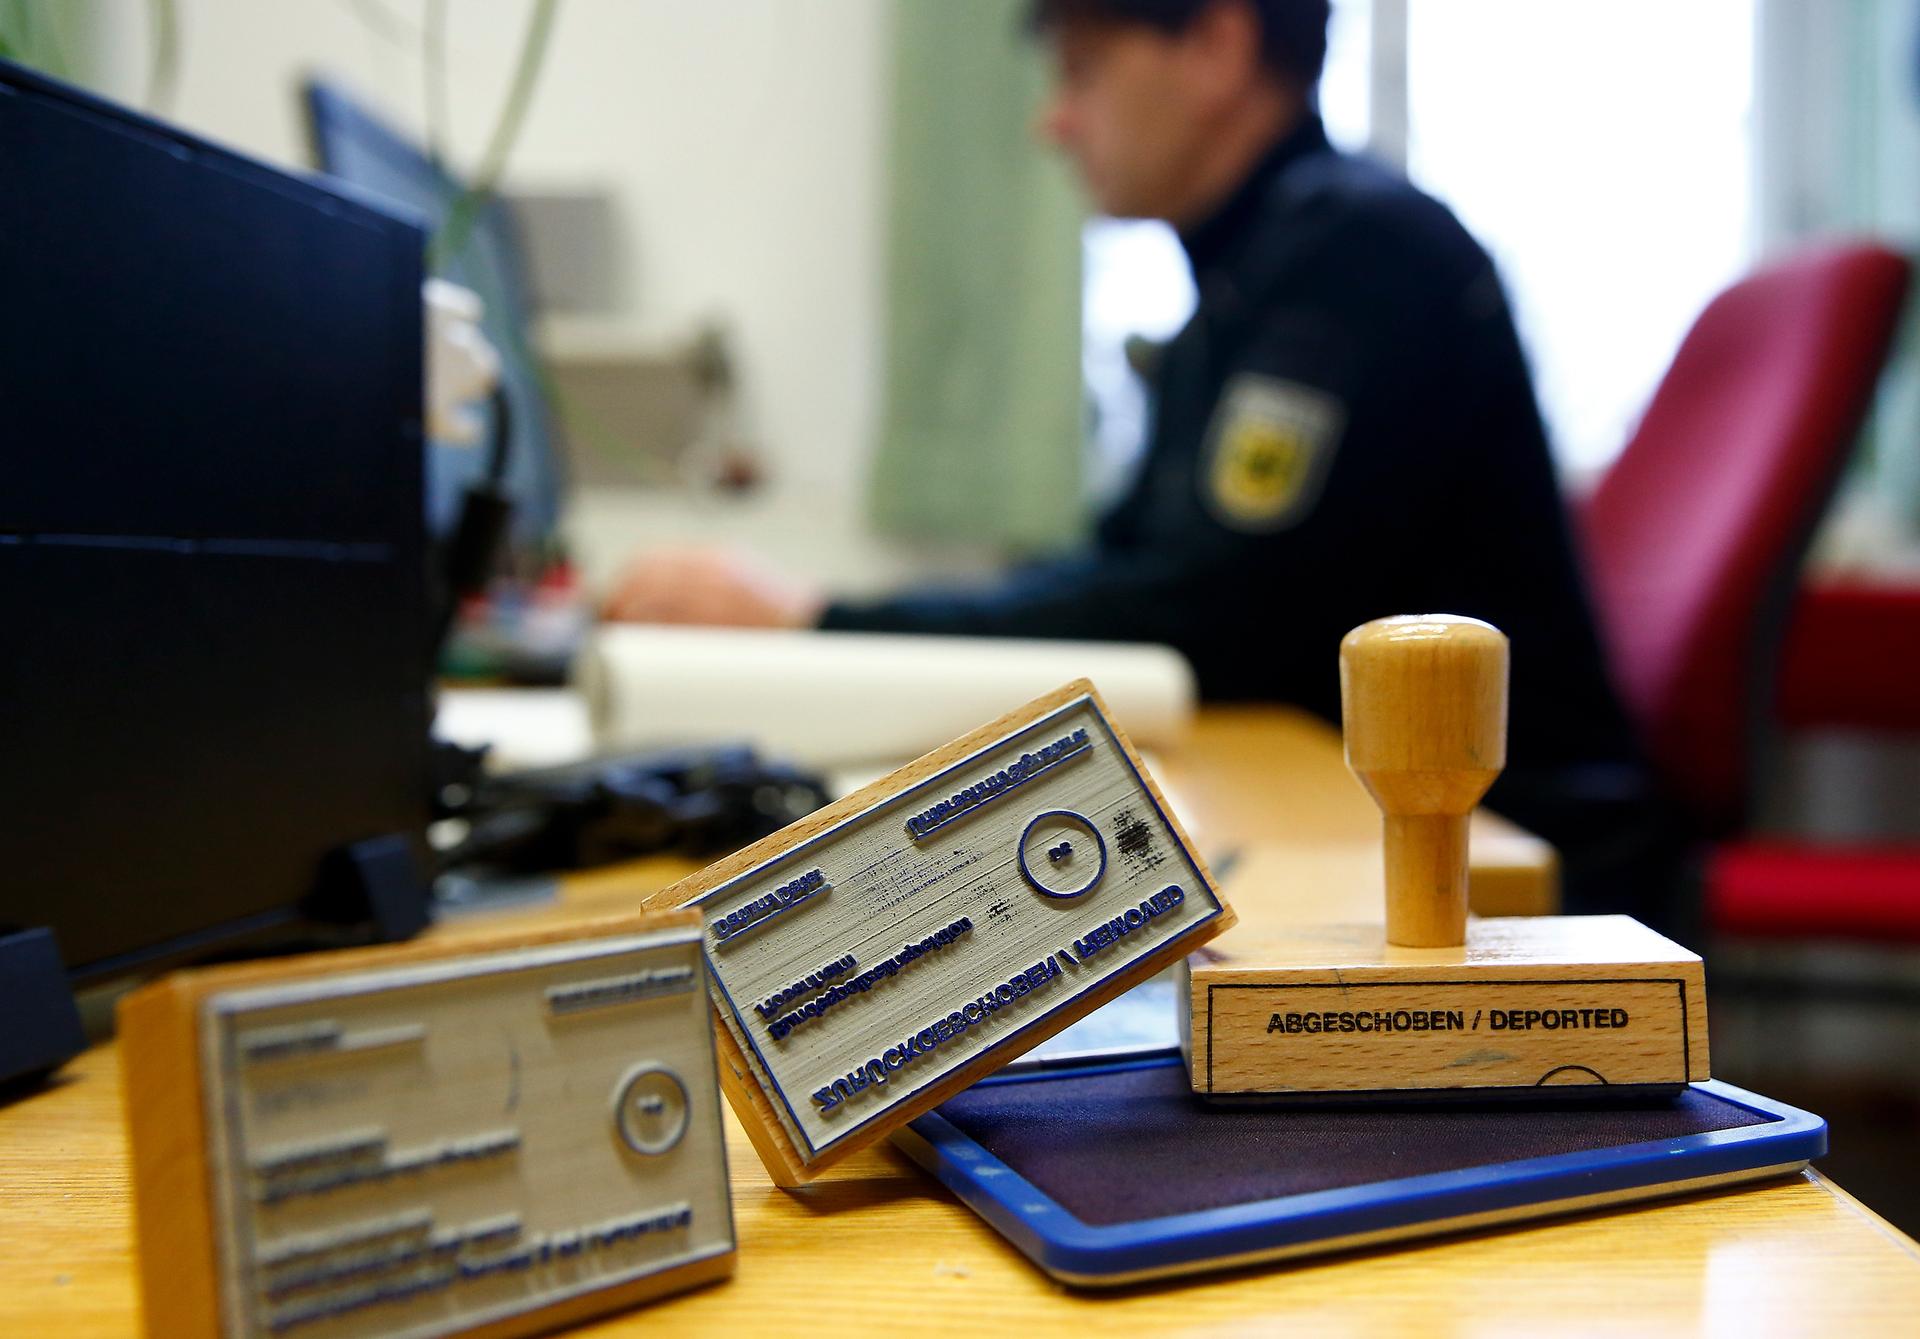 Deportation stamps used by the German federal police "Bundespolizei" to stamp ID documents of rejected asylum seekers, in Rosenheim, southern Germany.